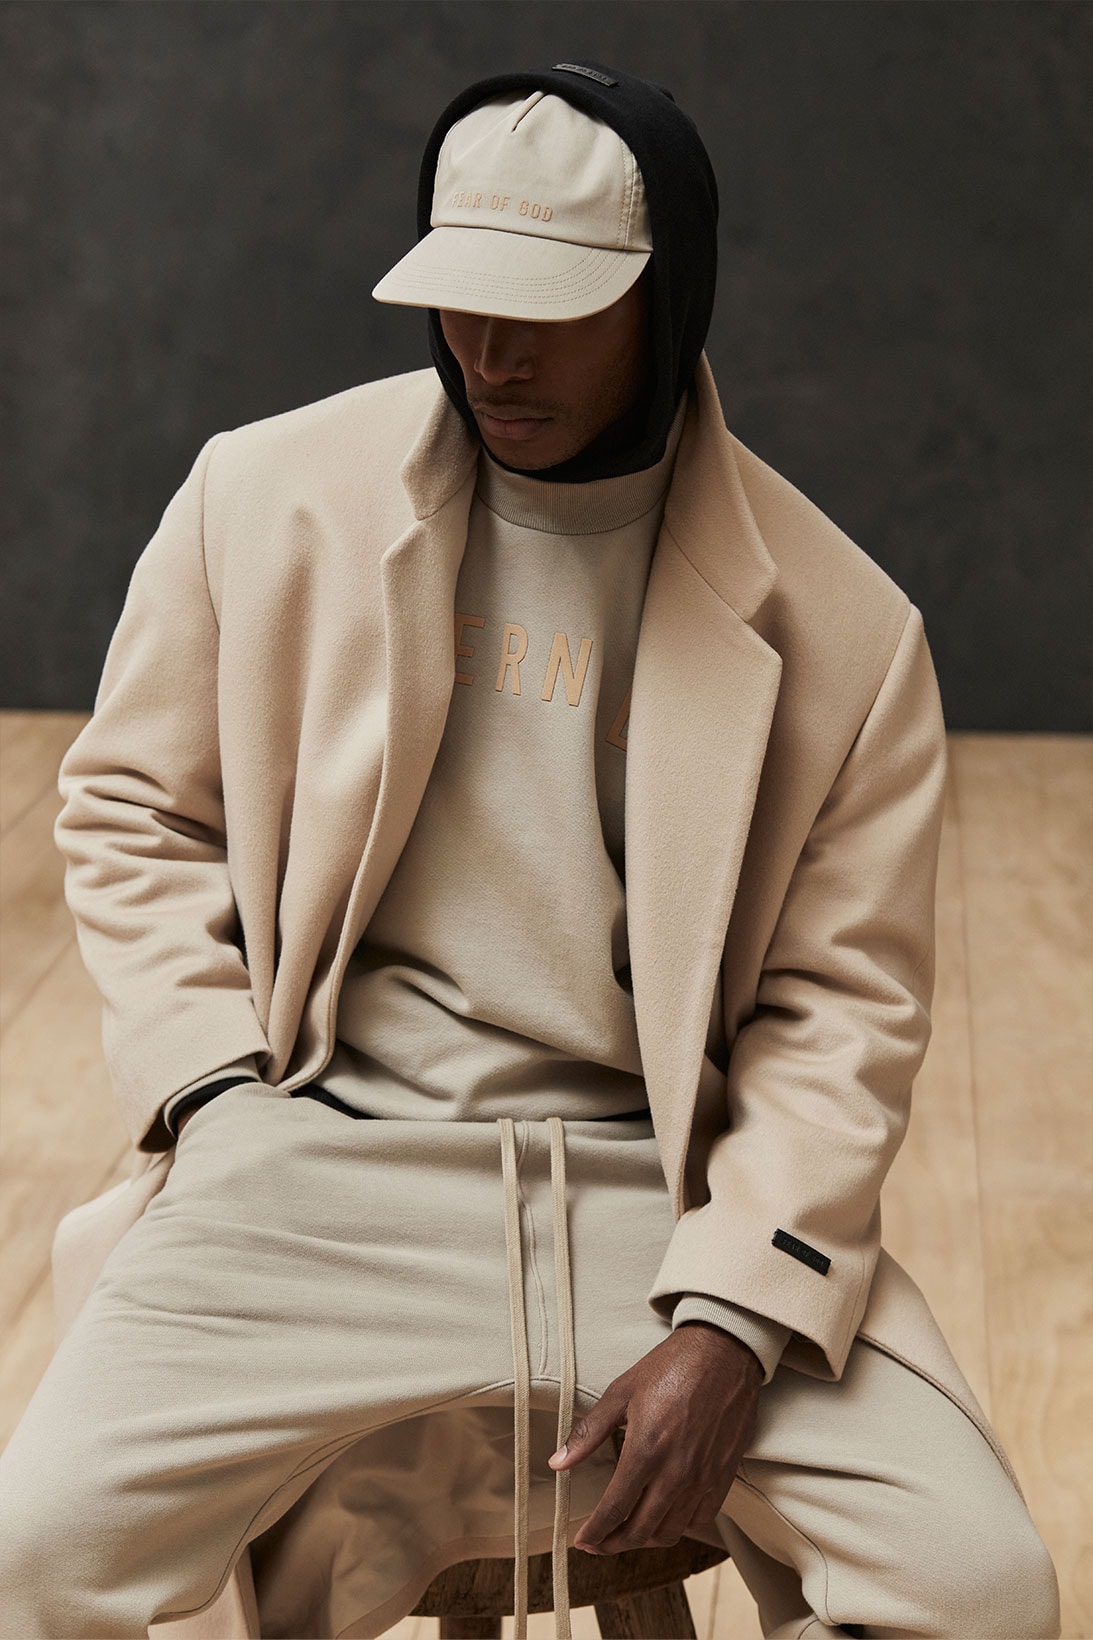 Fear of God ETERNAL Collection Second Delivery Release Where to buy